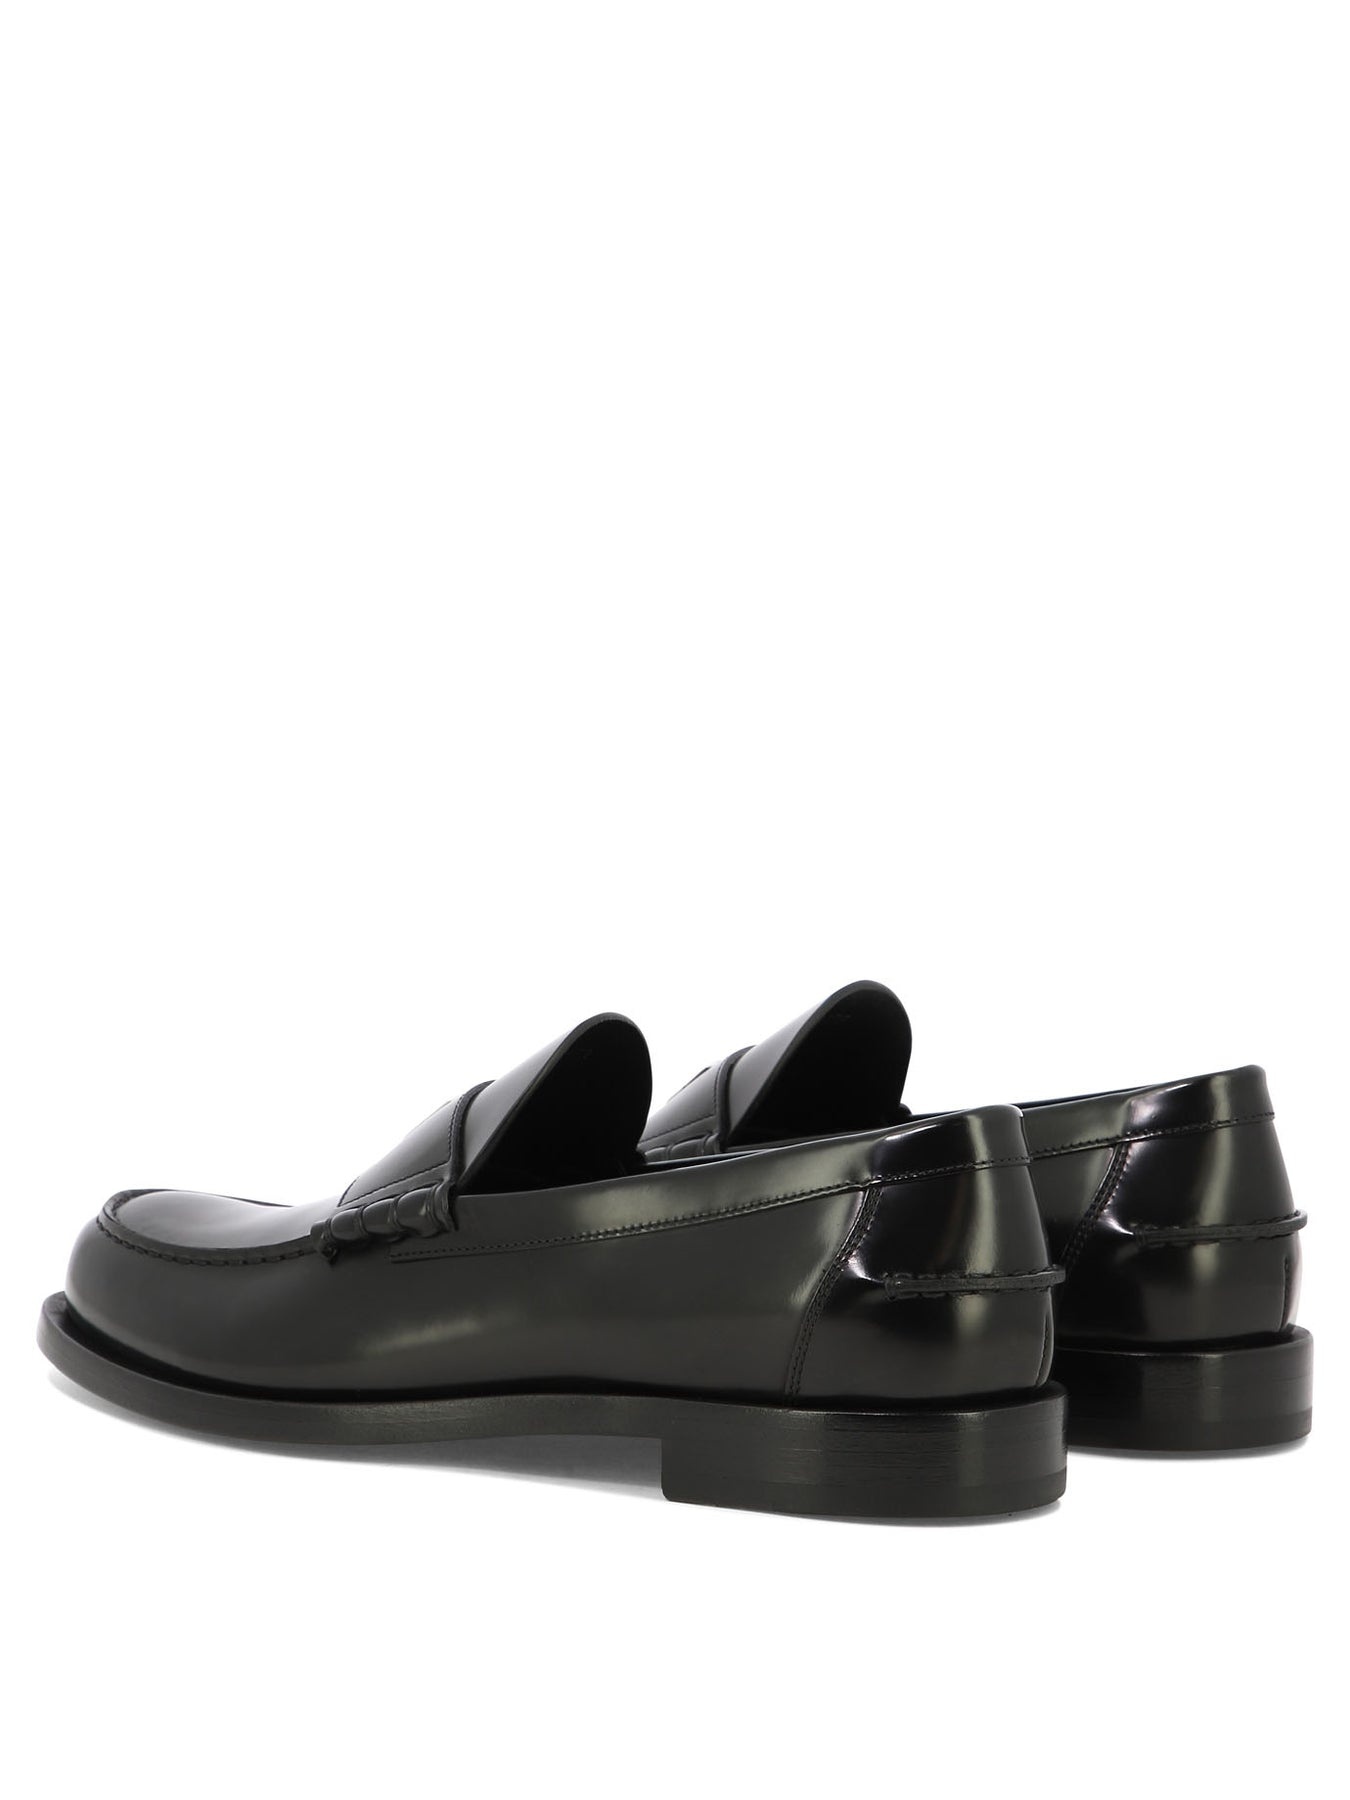 Mr G Loafers & Slippers Black - 4